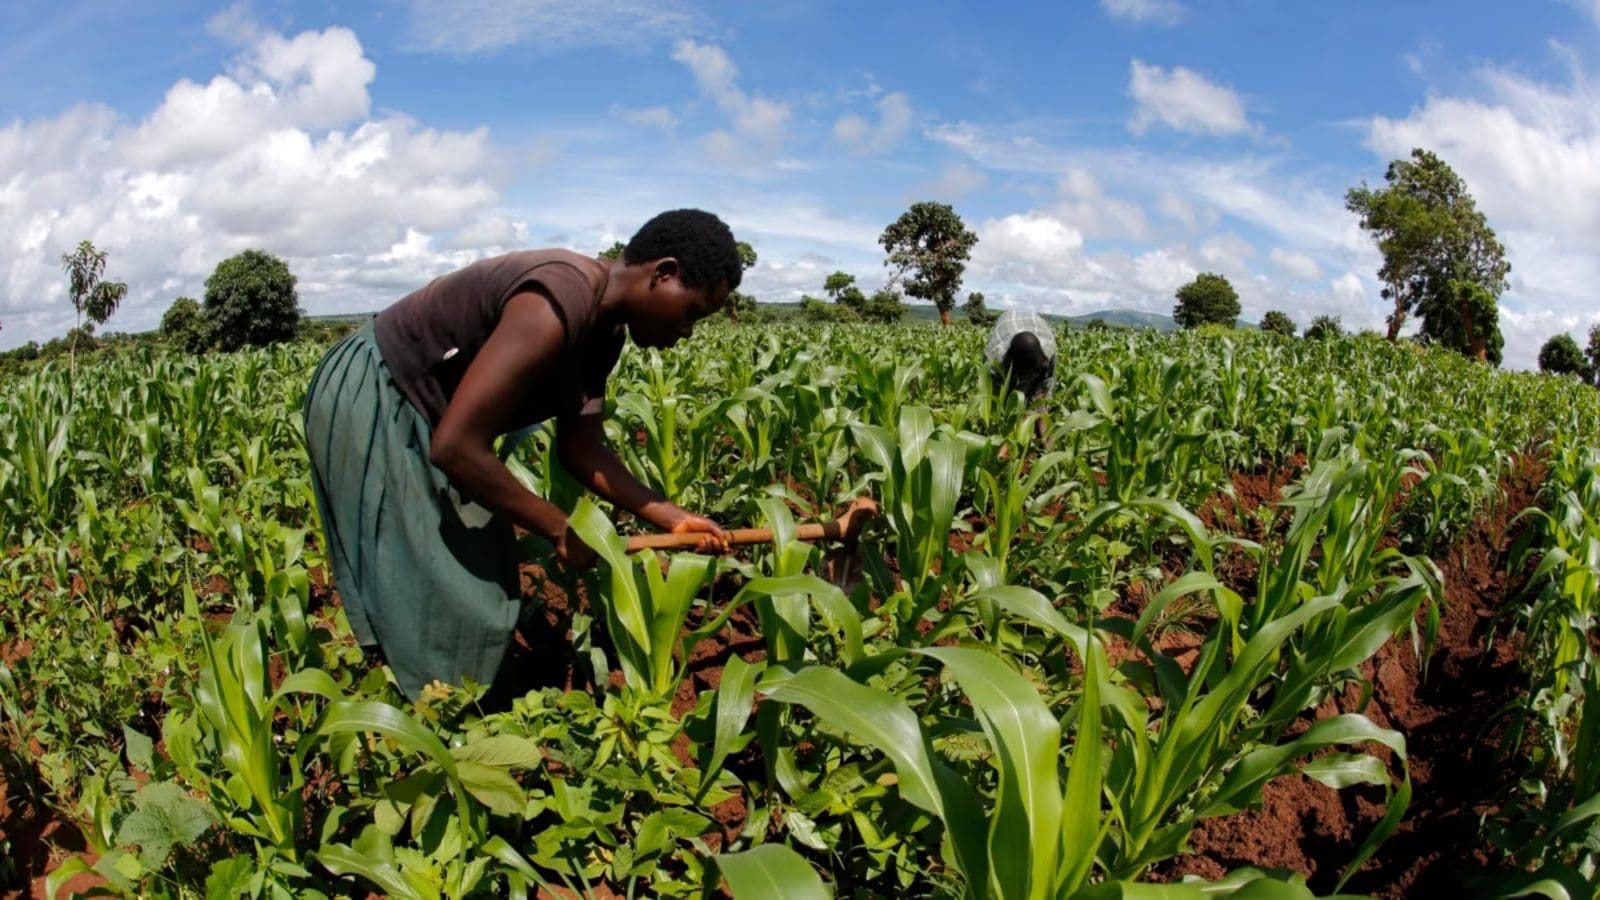 US$543m financing gap stands in the way of Malawi’s push to achieve sustainable agriculture by 2030